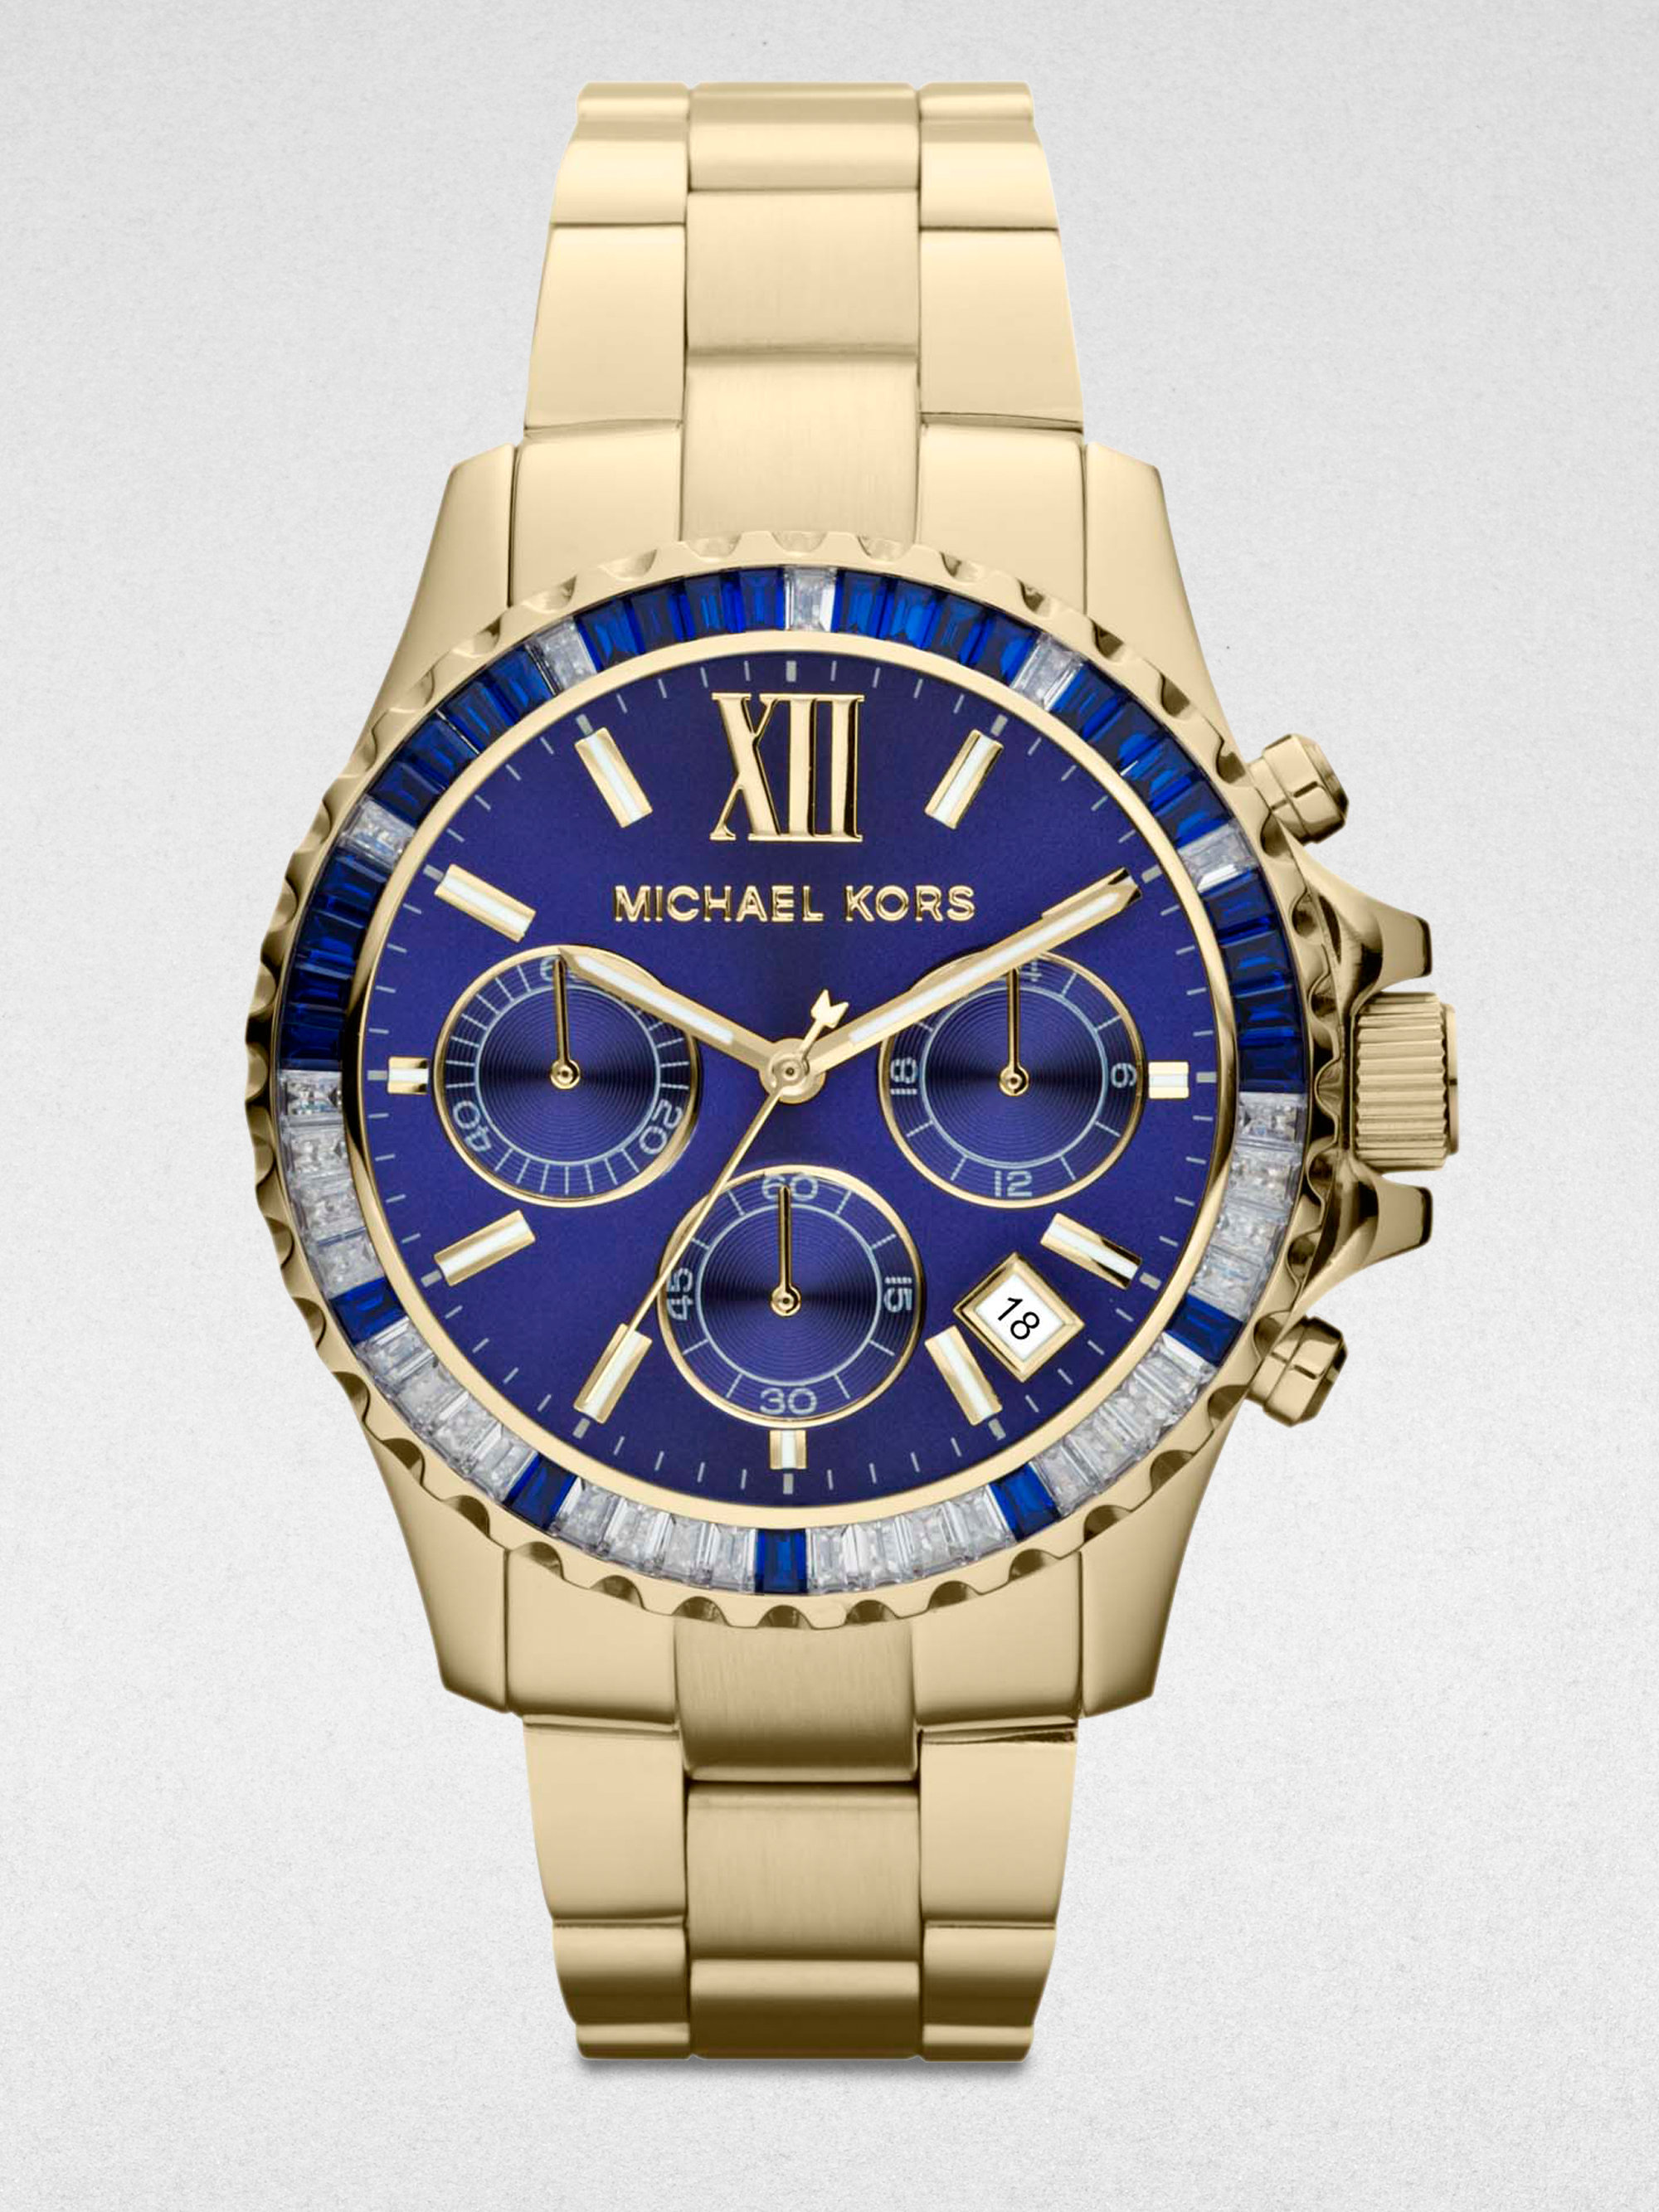 michael kors gold and blue watch